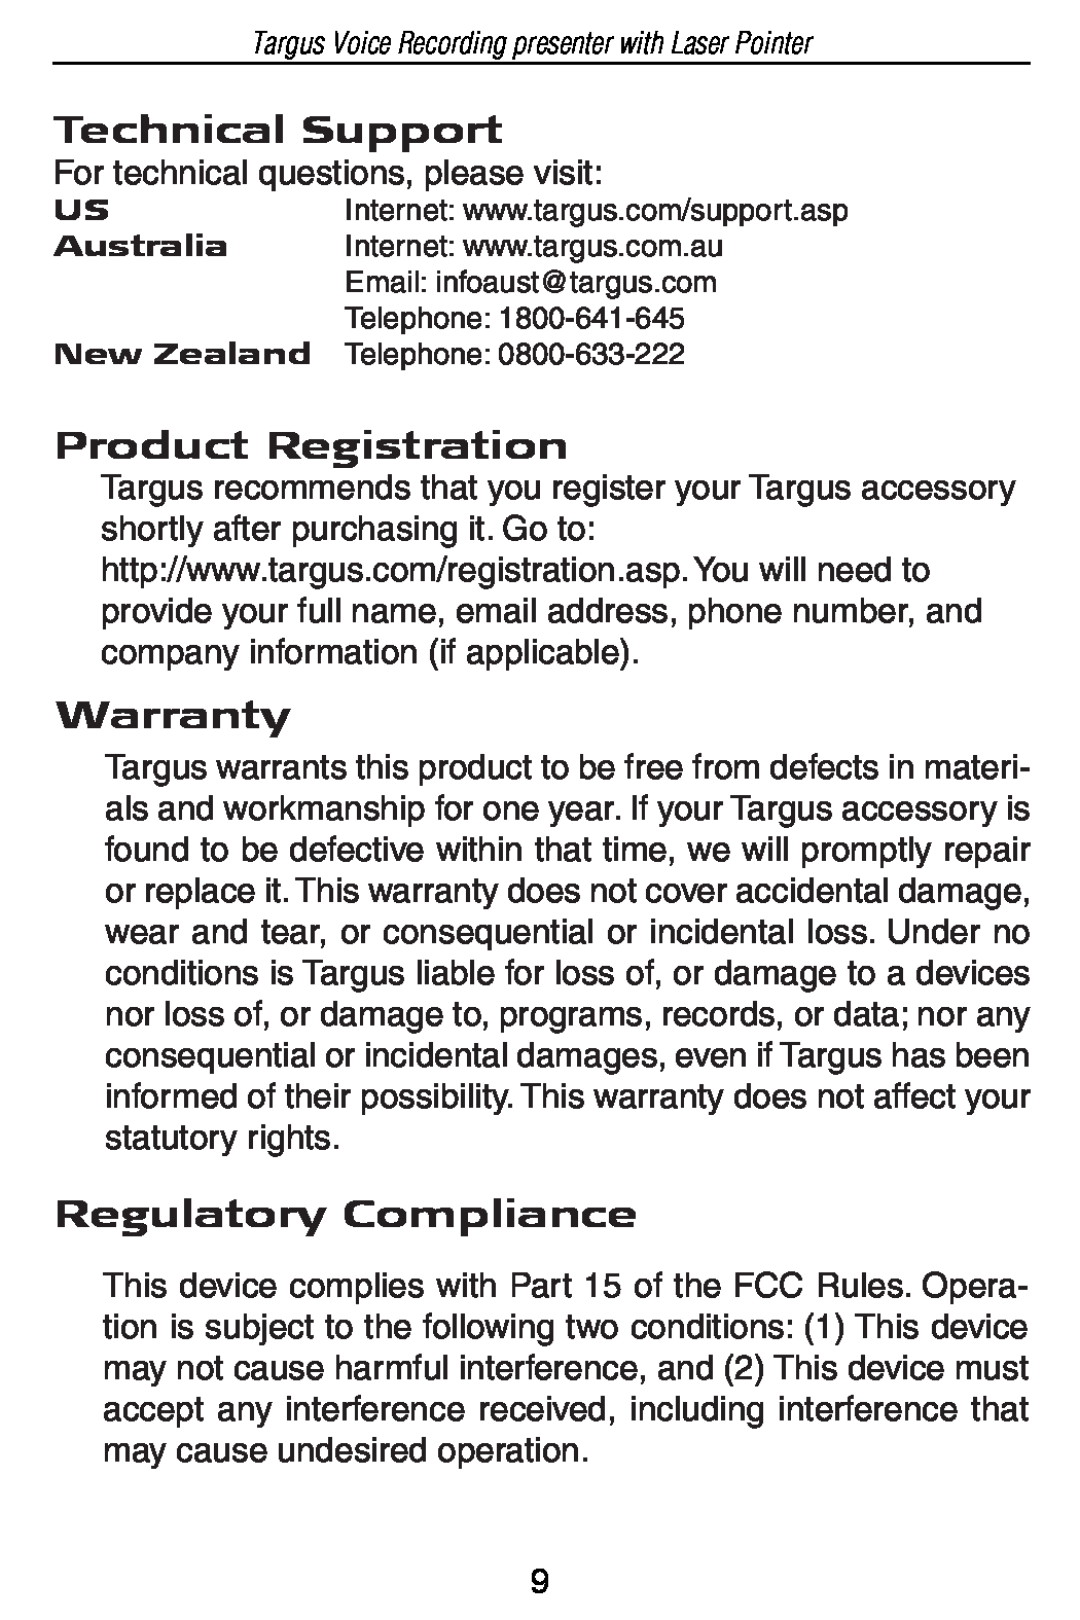 Targus AMP05US specifications Technical Support, Product Registration, Warranty, Regulatory Compliance 